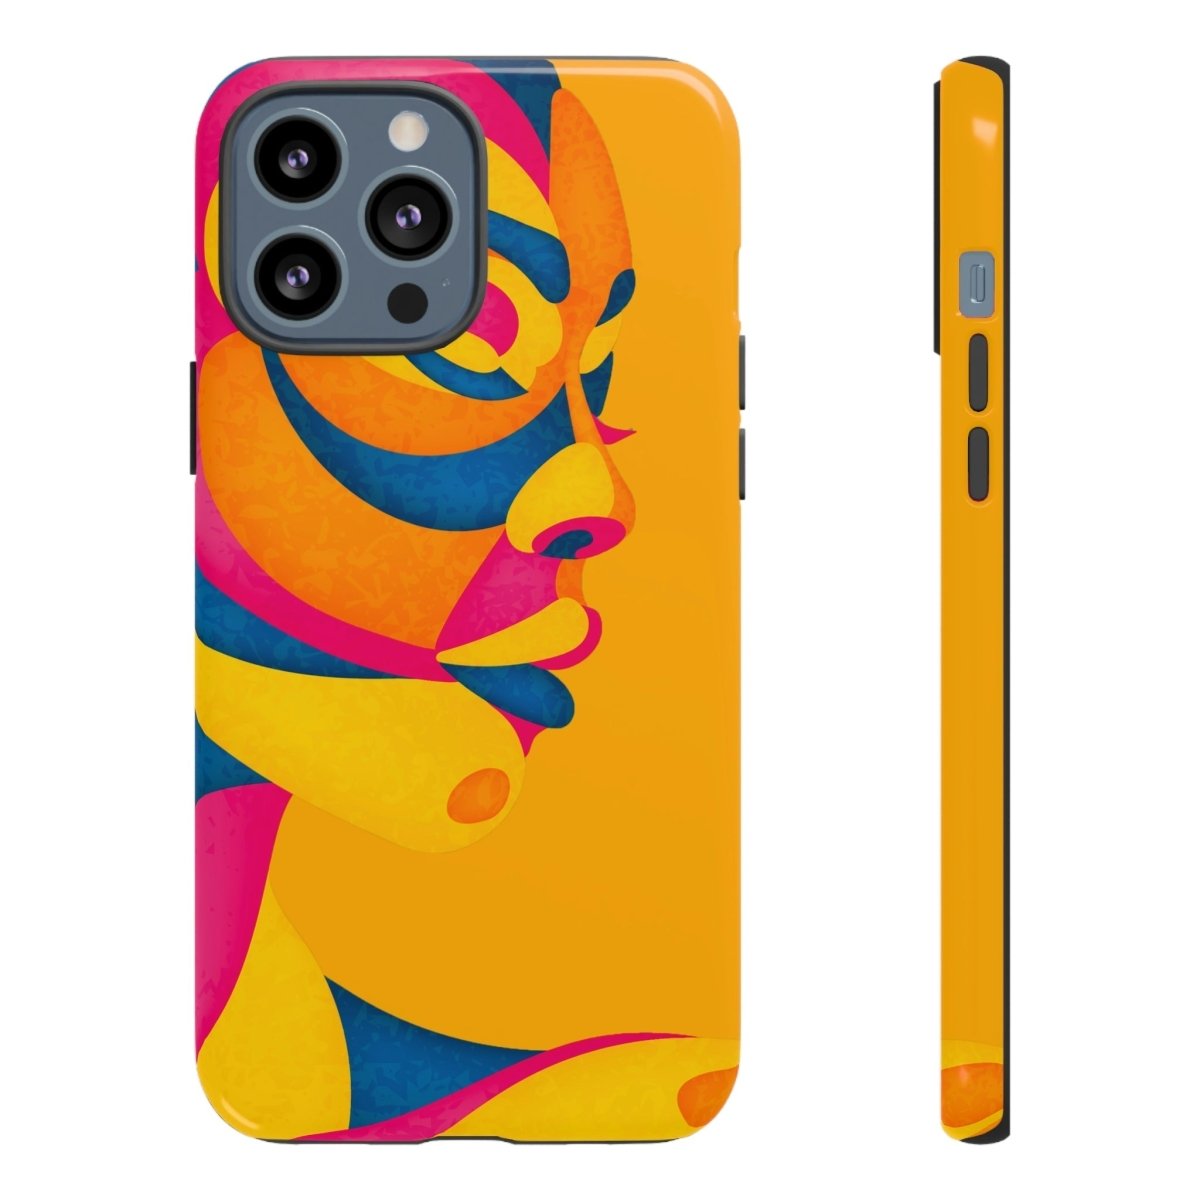 Colorful Face Phone Case - The Trini Gee